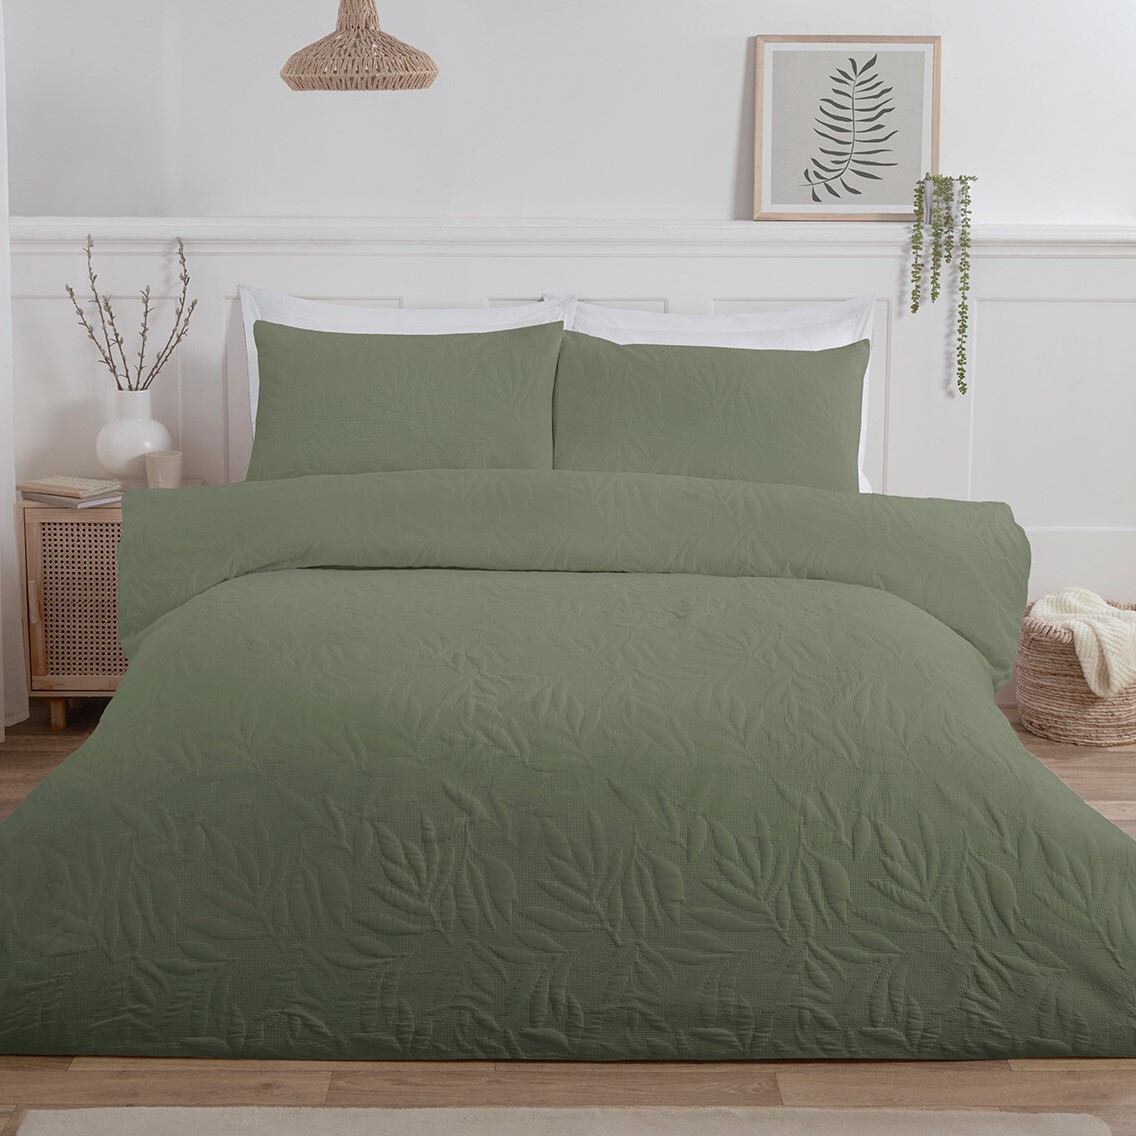 Avery Leaf Duvet Cover and Pillowcase Set - Olive Green / Double Image 1